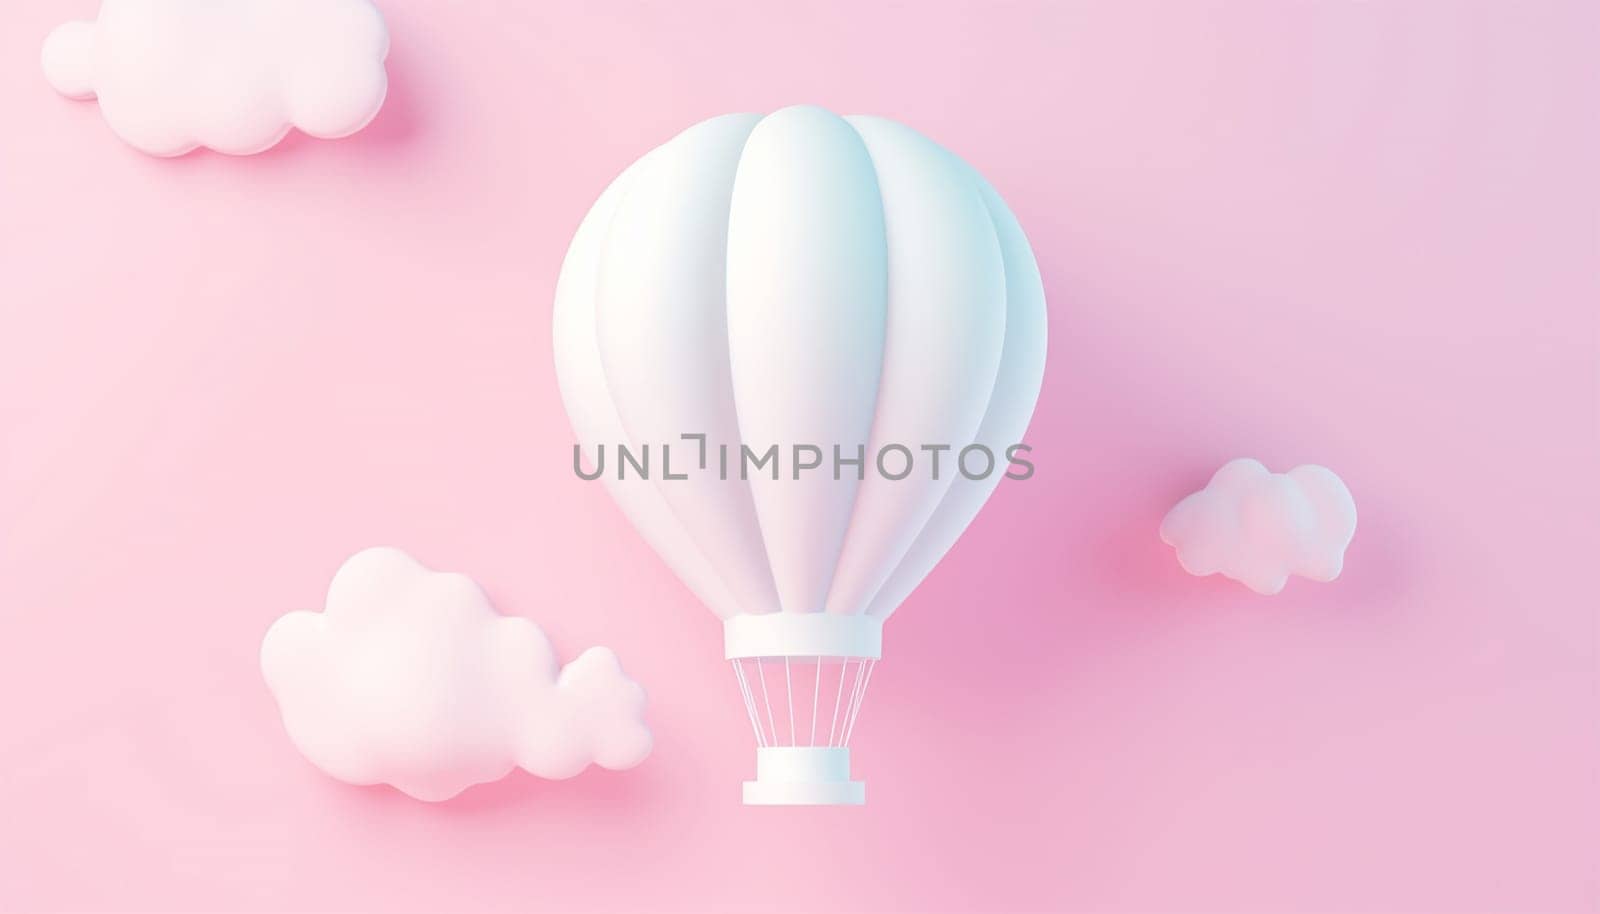 Cute pastel hot air balloon flying in the air. Design illustration of scene with hot air balloons float up in the sky on 3D paper art style. Hot air balloon float up in the sky. pastel paper cut and craft style., illustration. Pink,purple and blue color Copy space by Annebel146